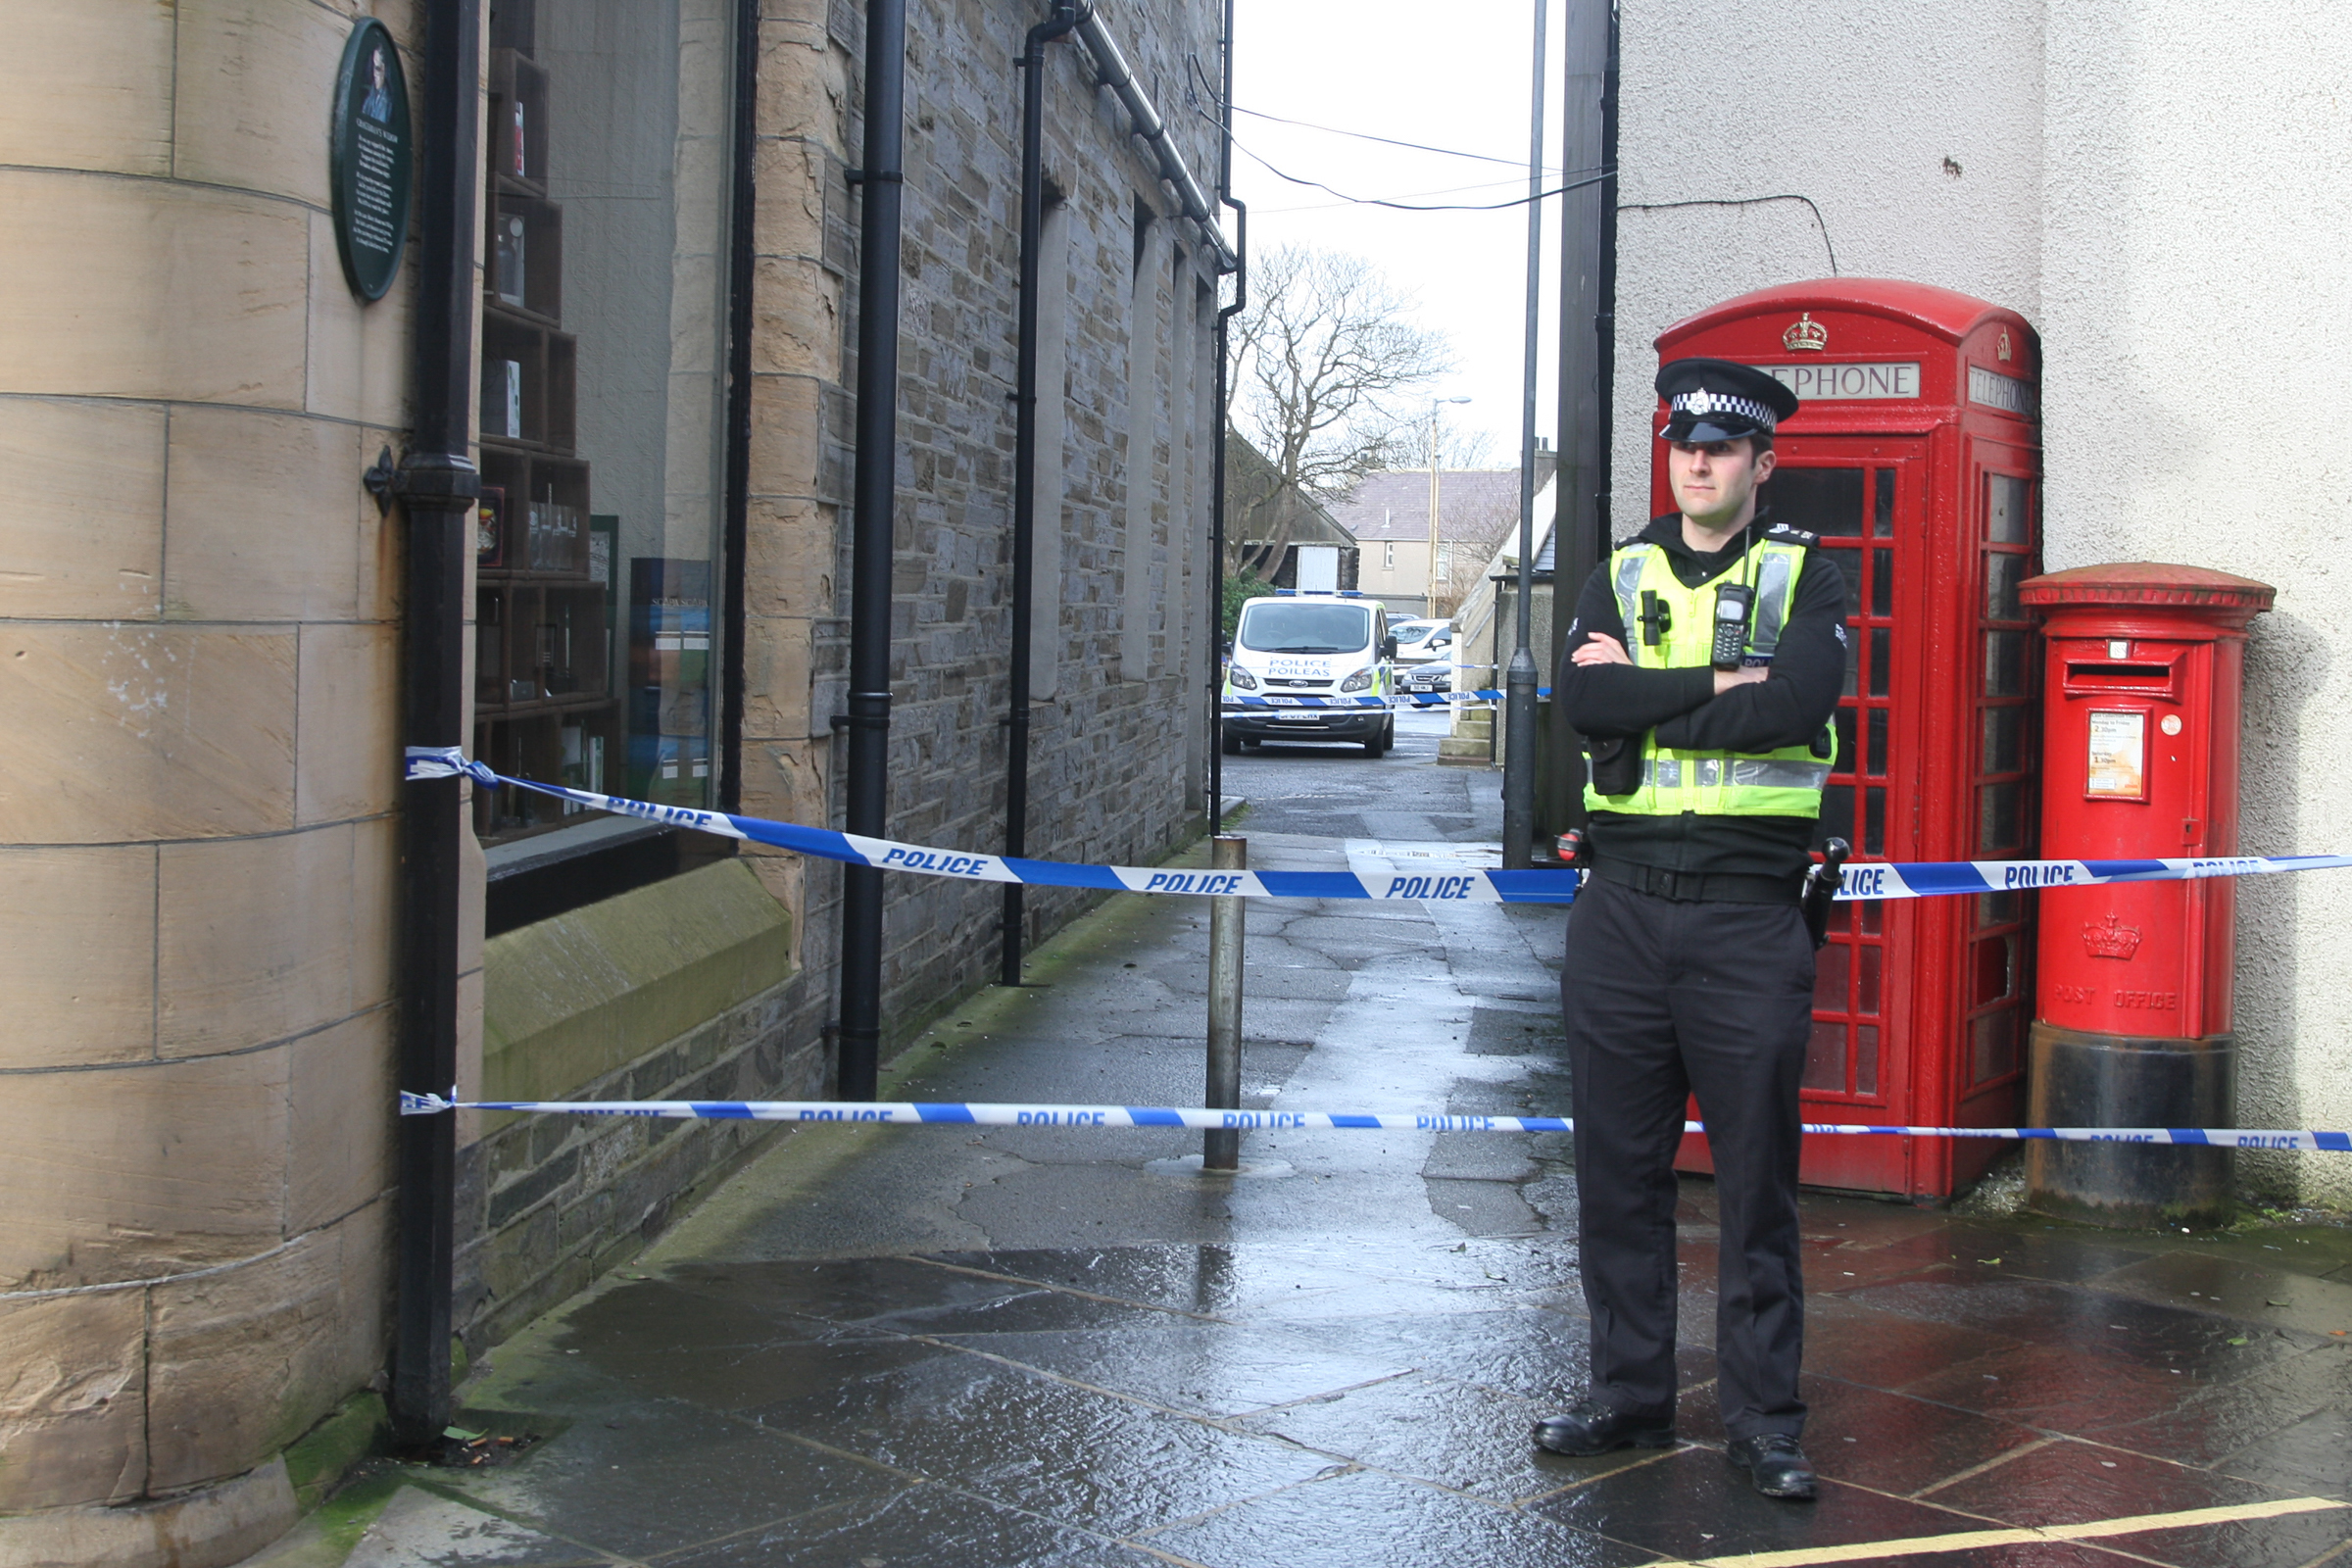 Police were yesterday carrying out inquiries following a report of a serious sexual assault of a women on Monday in the early hours in Bridge Street, Kirkwall, Orkney.